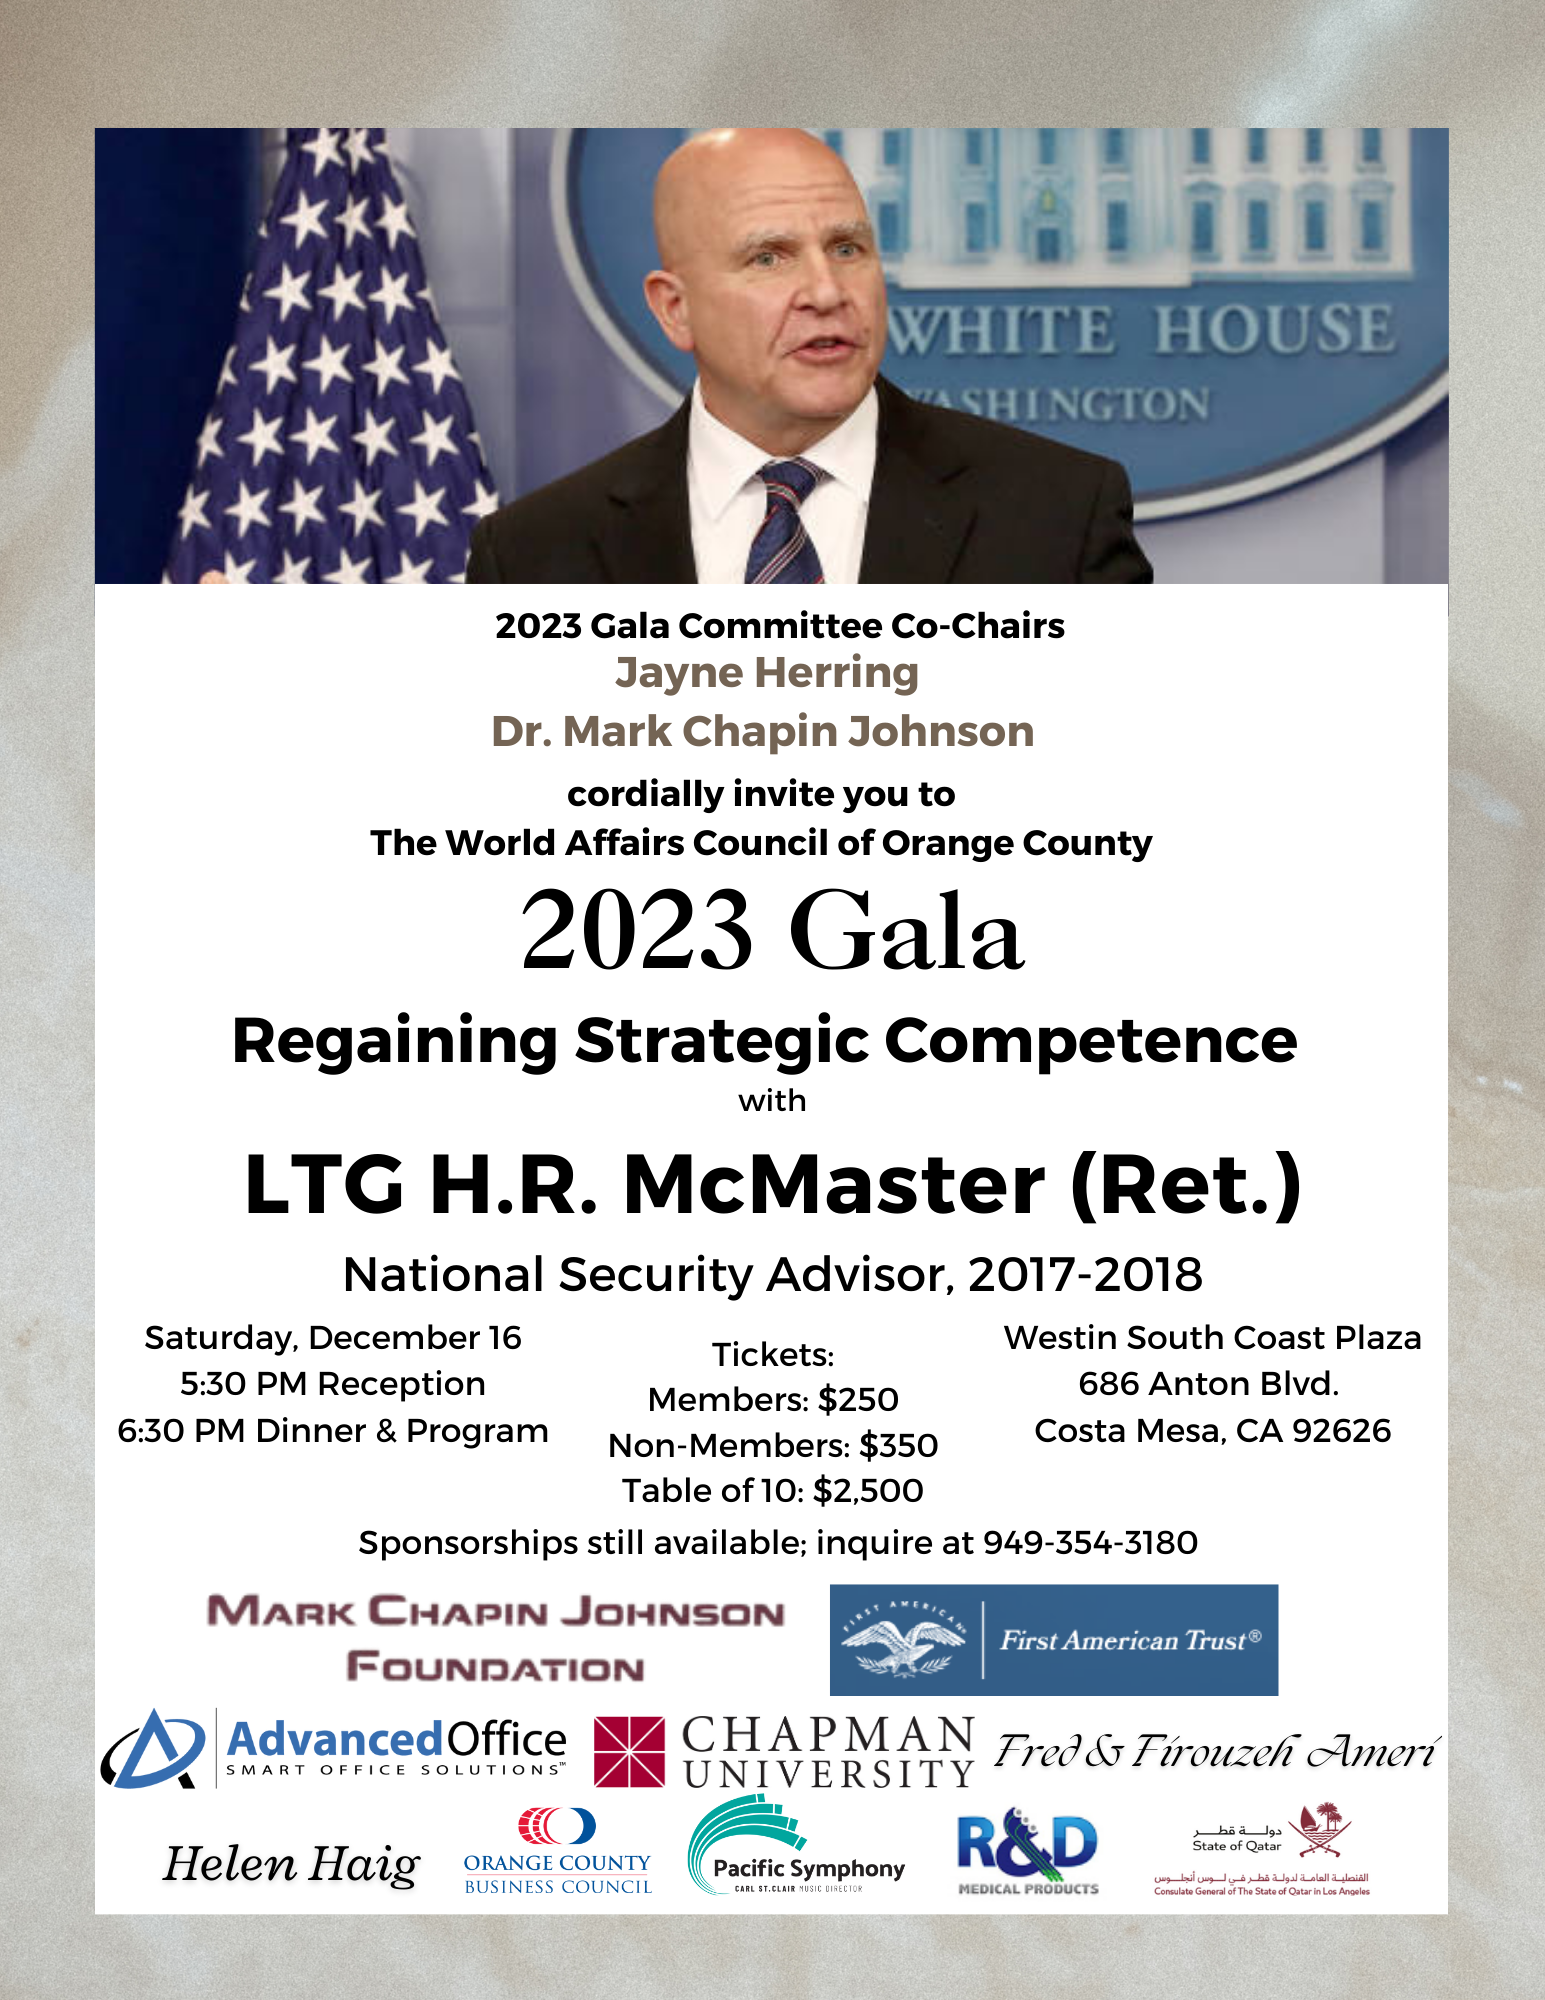 Annual Gala with LTG H.R. McMaster (Ret.)